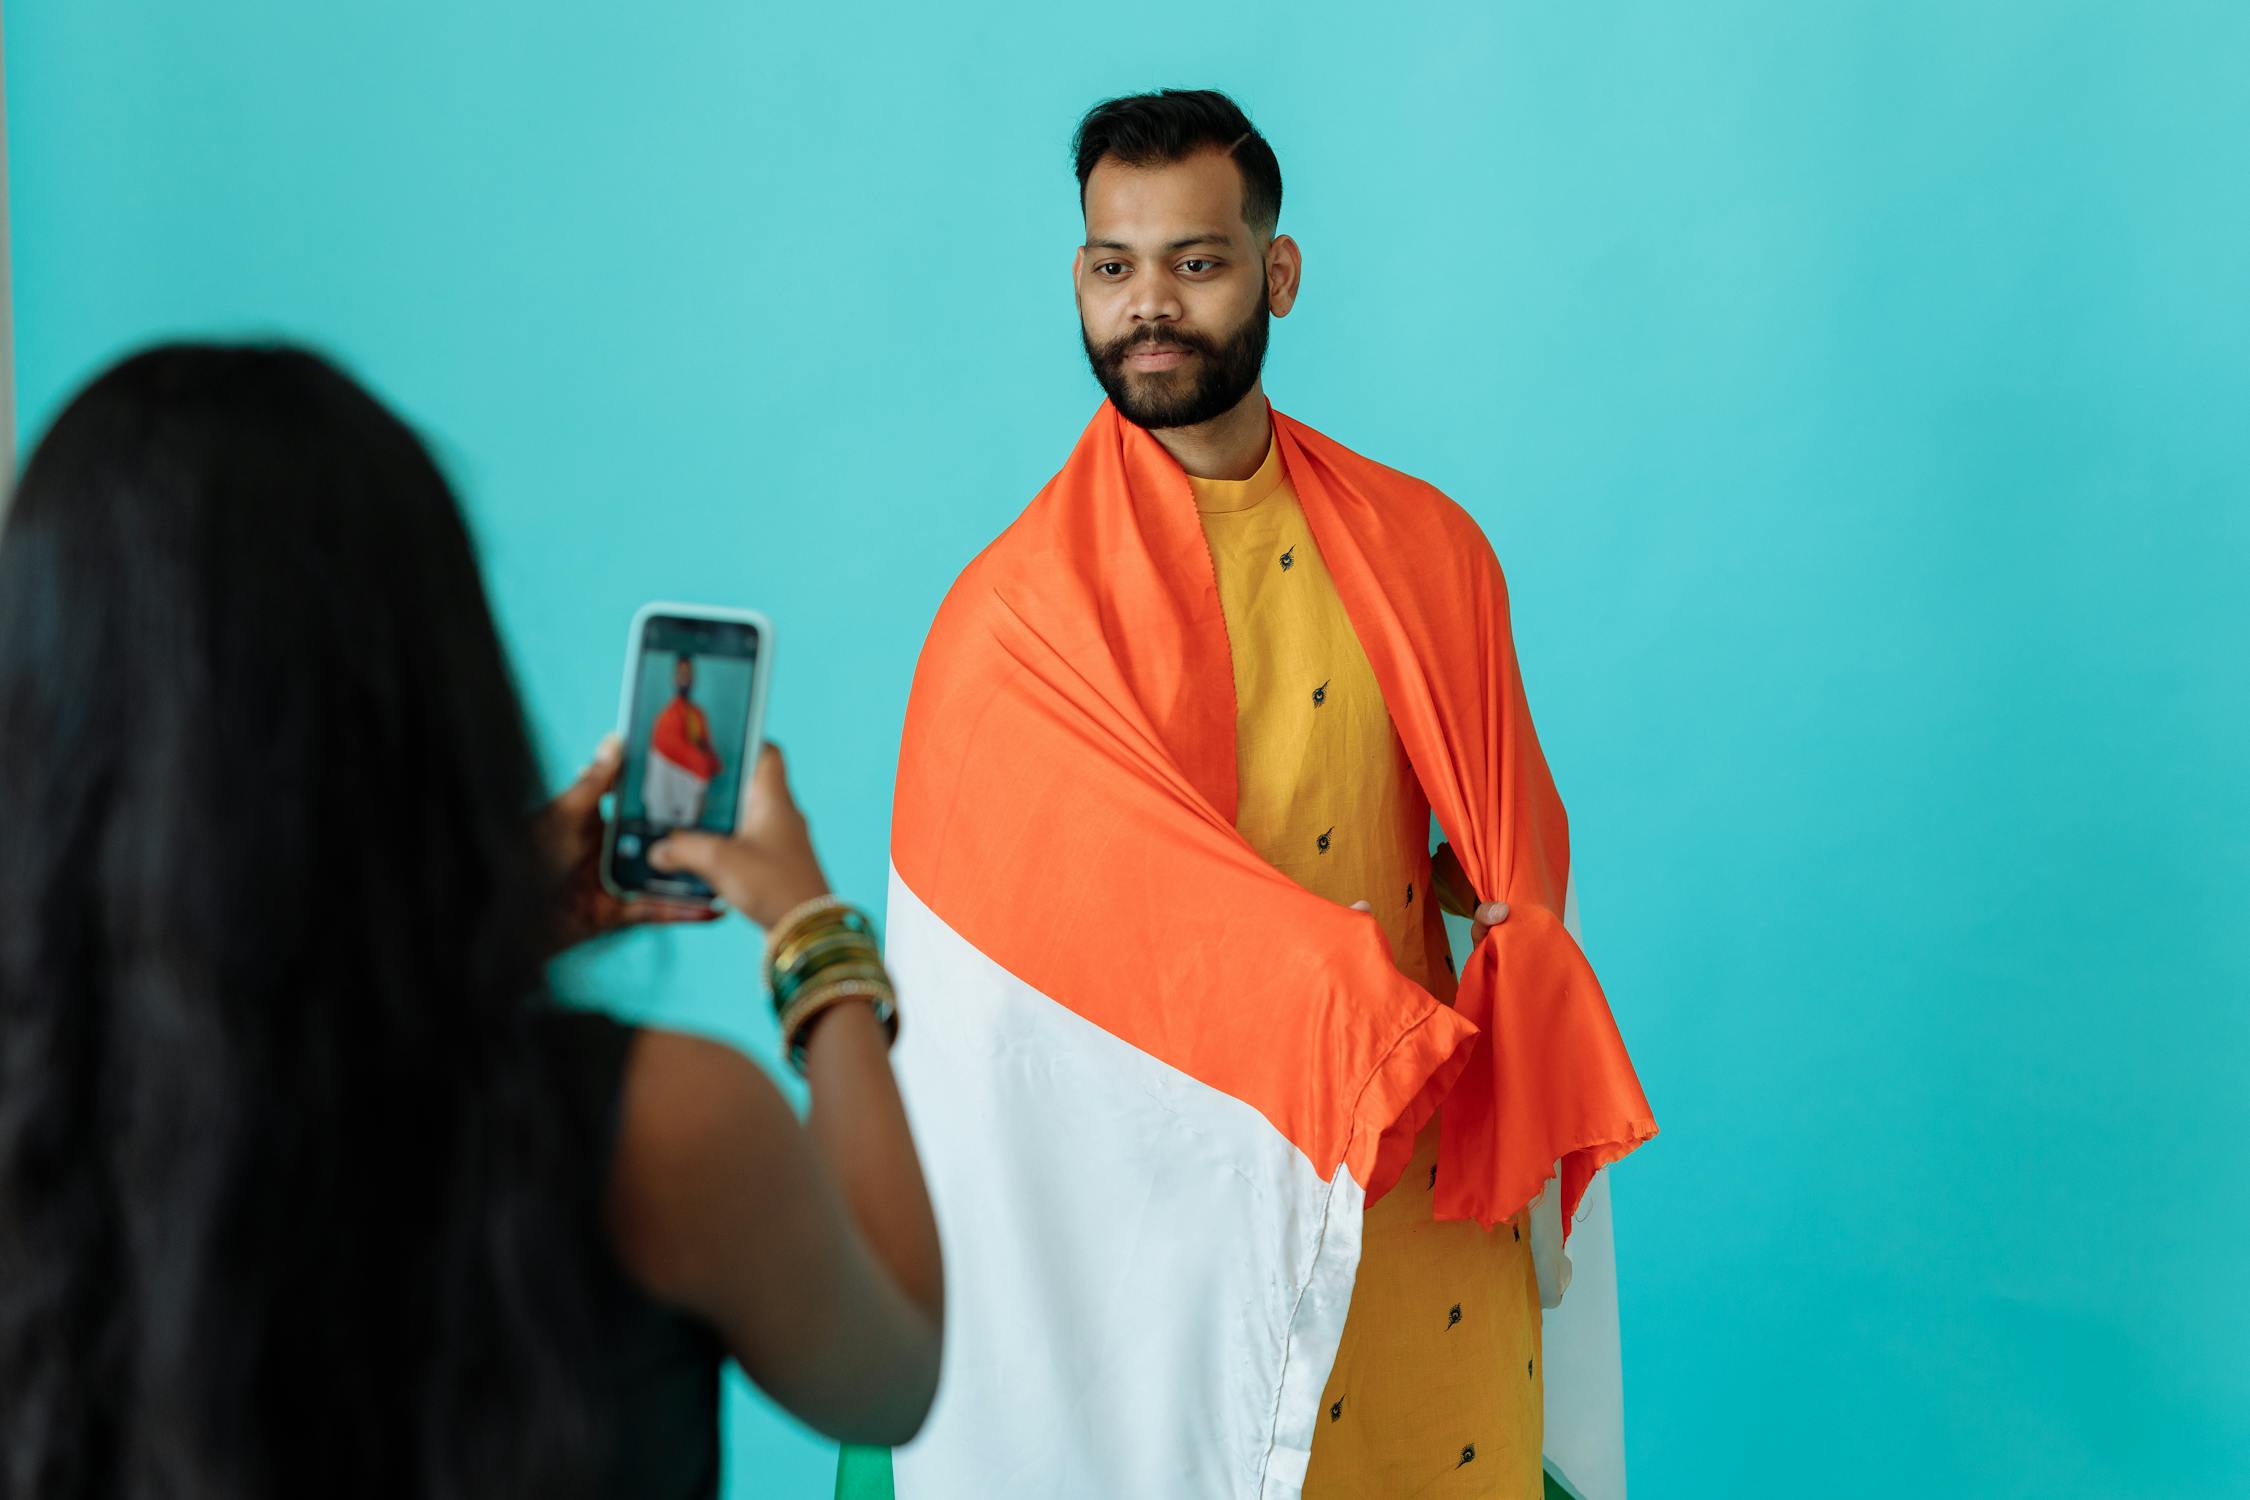 Media Photo by Thirdman from Pexels: https://www.pexels.com/photo/woman-taking-photo-of-man-wearing-flag-of-india-8489794/